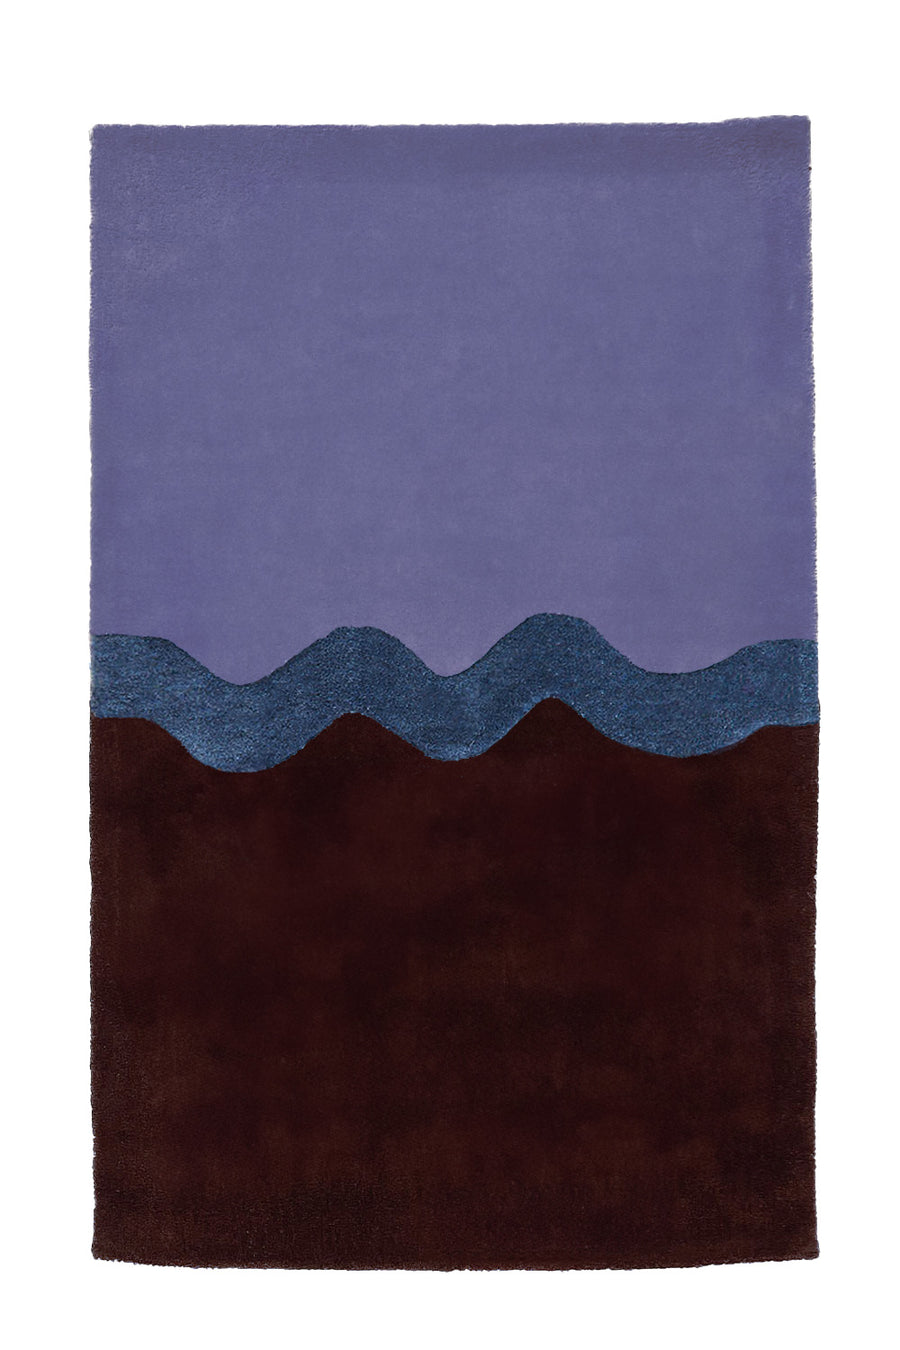 Neapolitan: Blue and Brown Hand Tufted Wool Rug